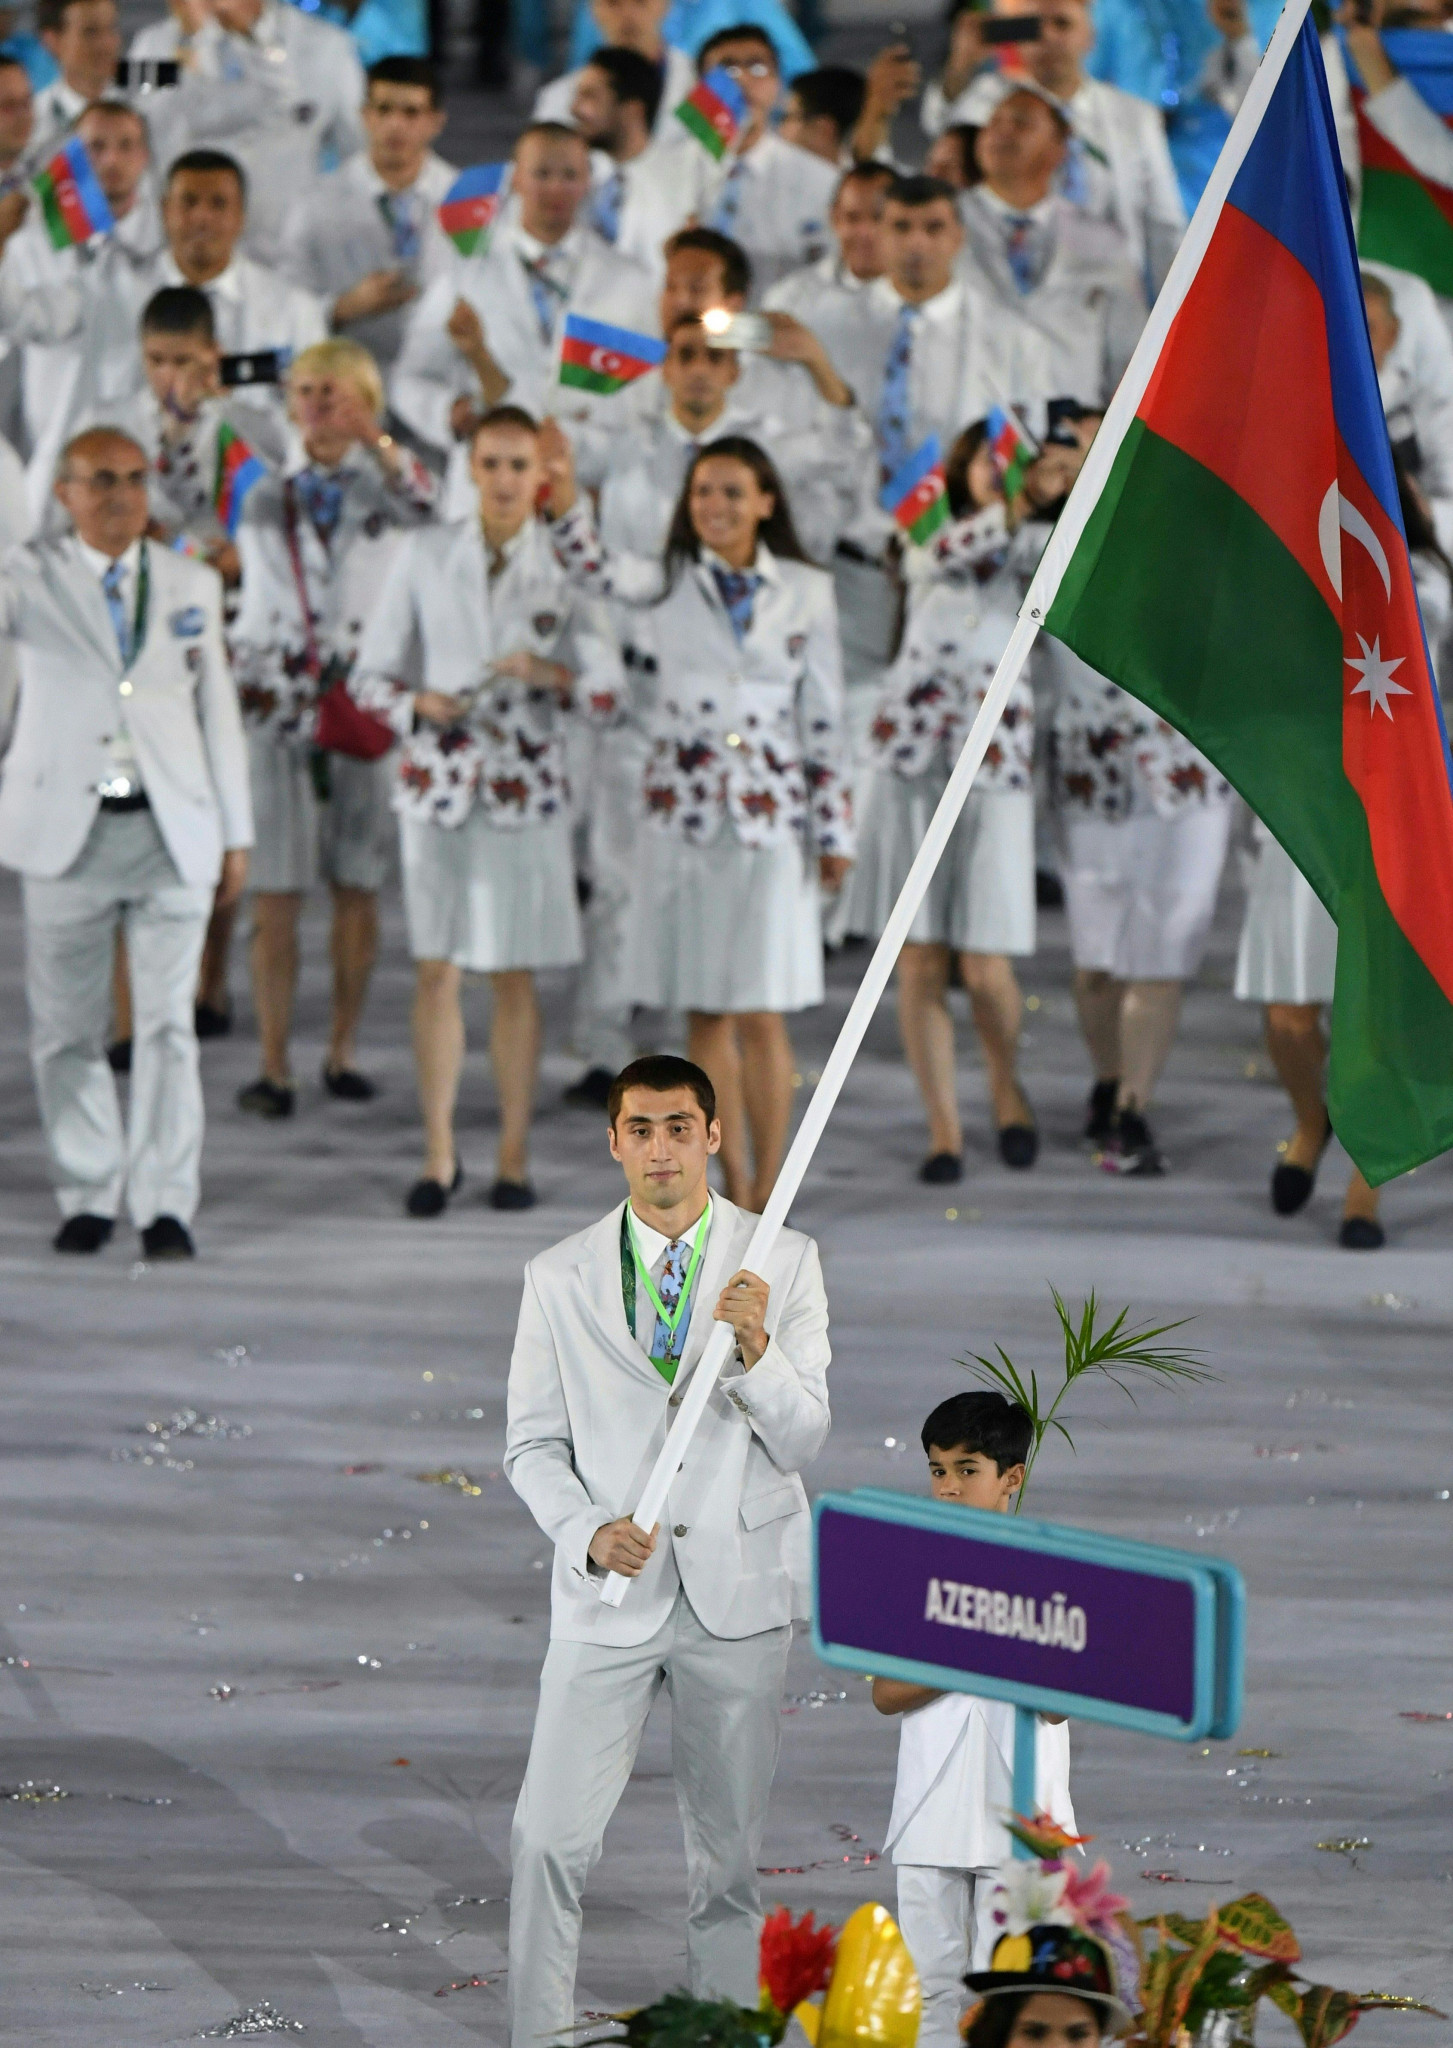 Under Azad Rahimov, Azerbaijan enjoyed a series of record-breaking Olympic performances - but they were often overshadowed by allegations of doping and corruption ©Getty Images